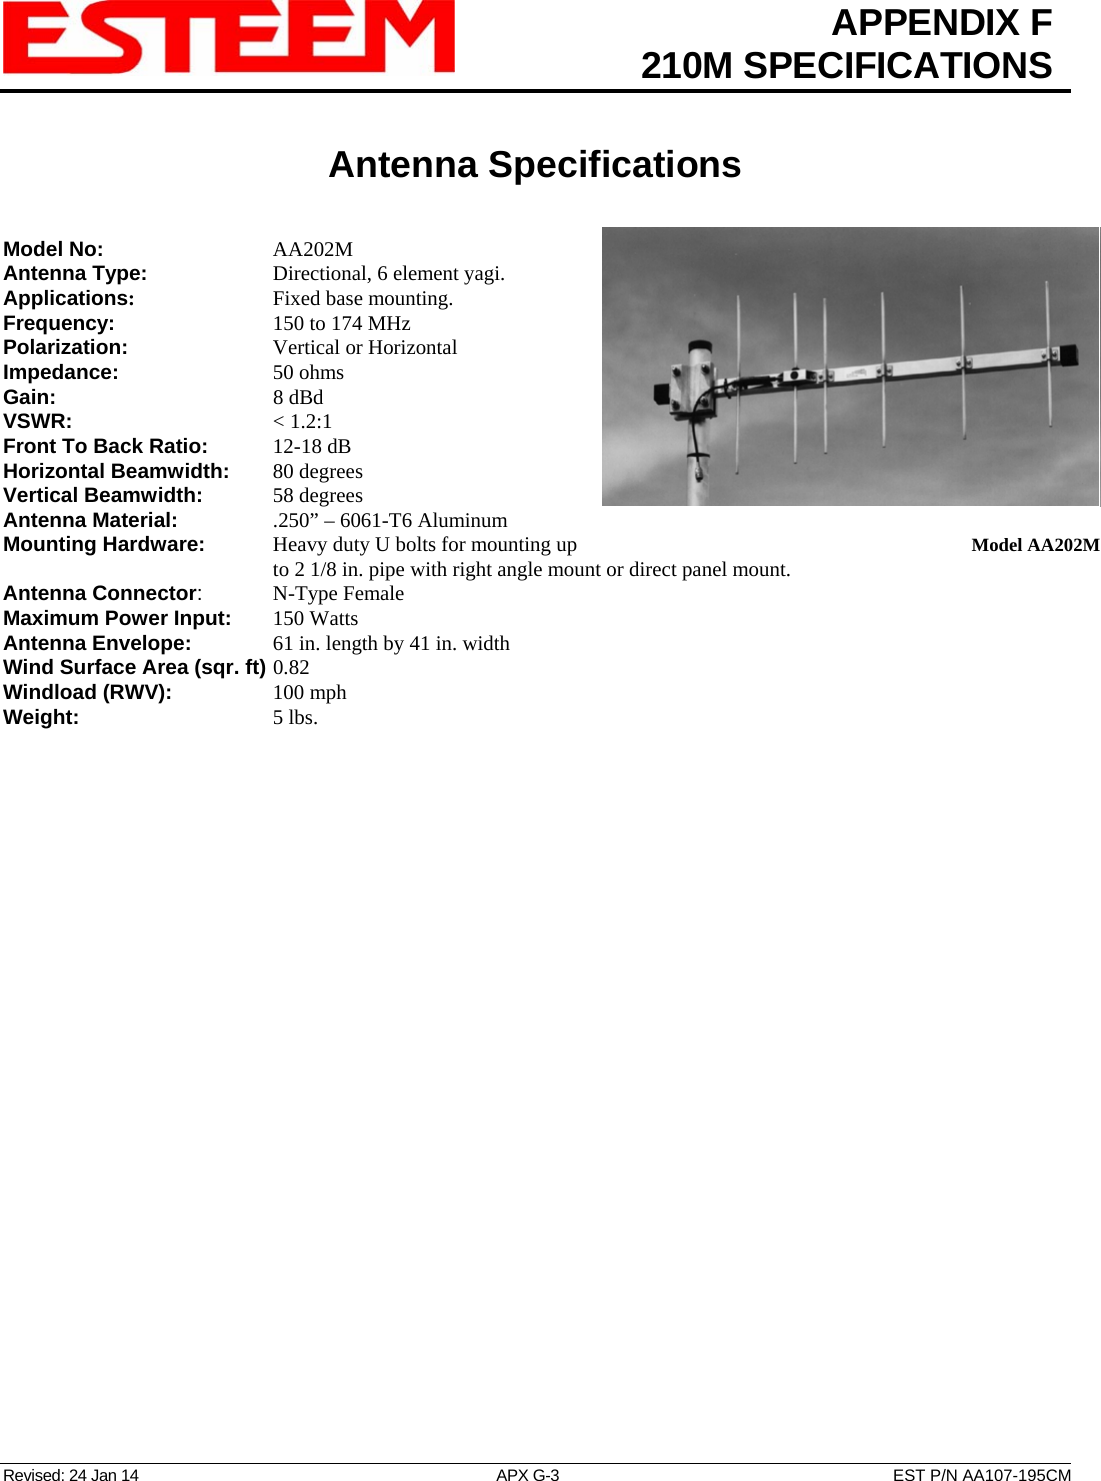  APPENDIX F  210M SPECIFICATIONS   Antenna Specifications   Revised: 24 Jan 14  APX G-3  EST P/N AA107-195CM Model No:    AA202M Antenna Type:      Directional, 6 element yagi.  Applications:    Fixed base mounting. Frequency:    150 to 174 MHz  Polarization:    Vertical or Horizontal Impedance:    50 ohms Gain:     8 dBd VSWR:      &lt; 1.2:1  Front To Back Ratio:   12-18 dB Horizontal Beamwidth:  80 degrees Vertical Beamwidth:      58 degrees Antenna Material:     .250” – 6061-T6 Aluminum  Mounting Hardware:      Heavy duty U bolts for mounting up to 2 1/8 in. pipe with right angle mount or direct panel mount.   Model AA202MAntenna Connector:   N-Type Female Maximum Power Input: 150 Watts Antenna Envelope:    61 in. length by 41 in. width Wind Surface Area (sqr. ft) 0.82 Windload (RWV):   100 mph Weight:     5 lbs.        